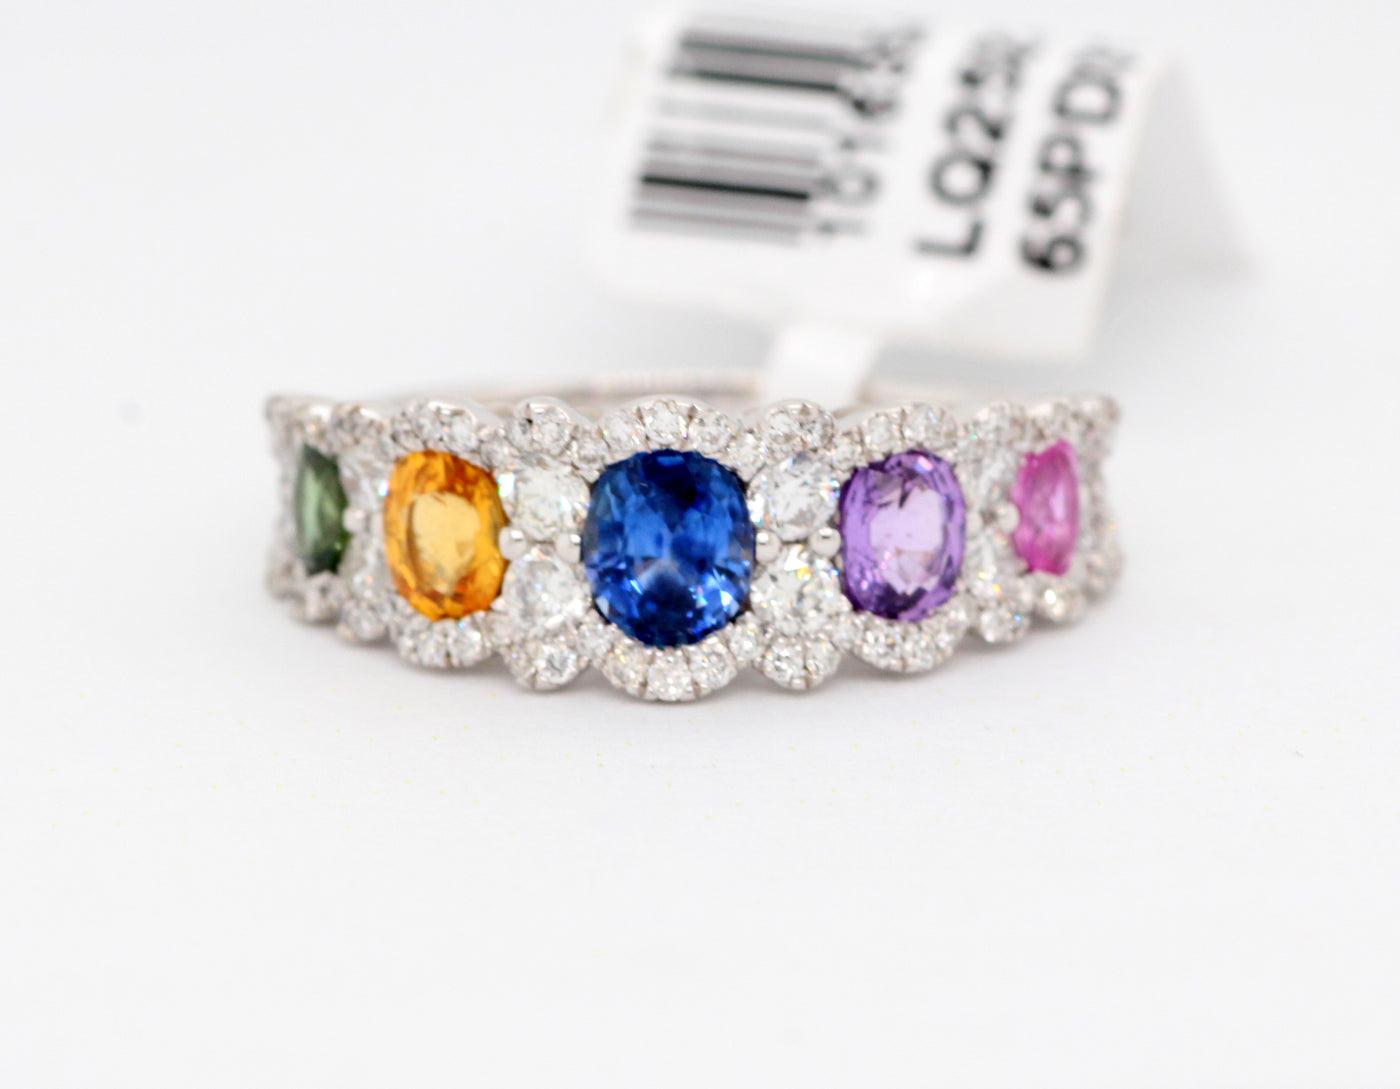 18KW 1.34 Cttw Multi Color Sapphire and Diamond Ring with .62 Cttw in image